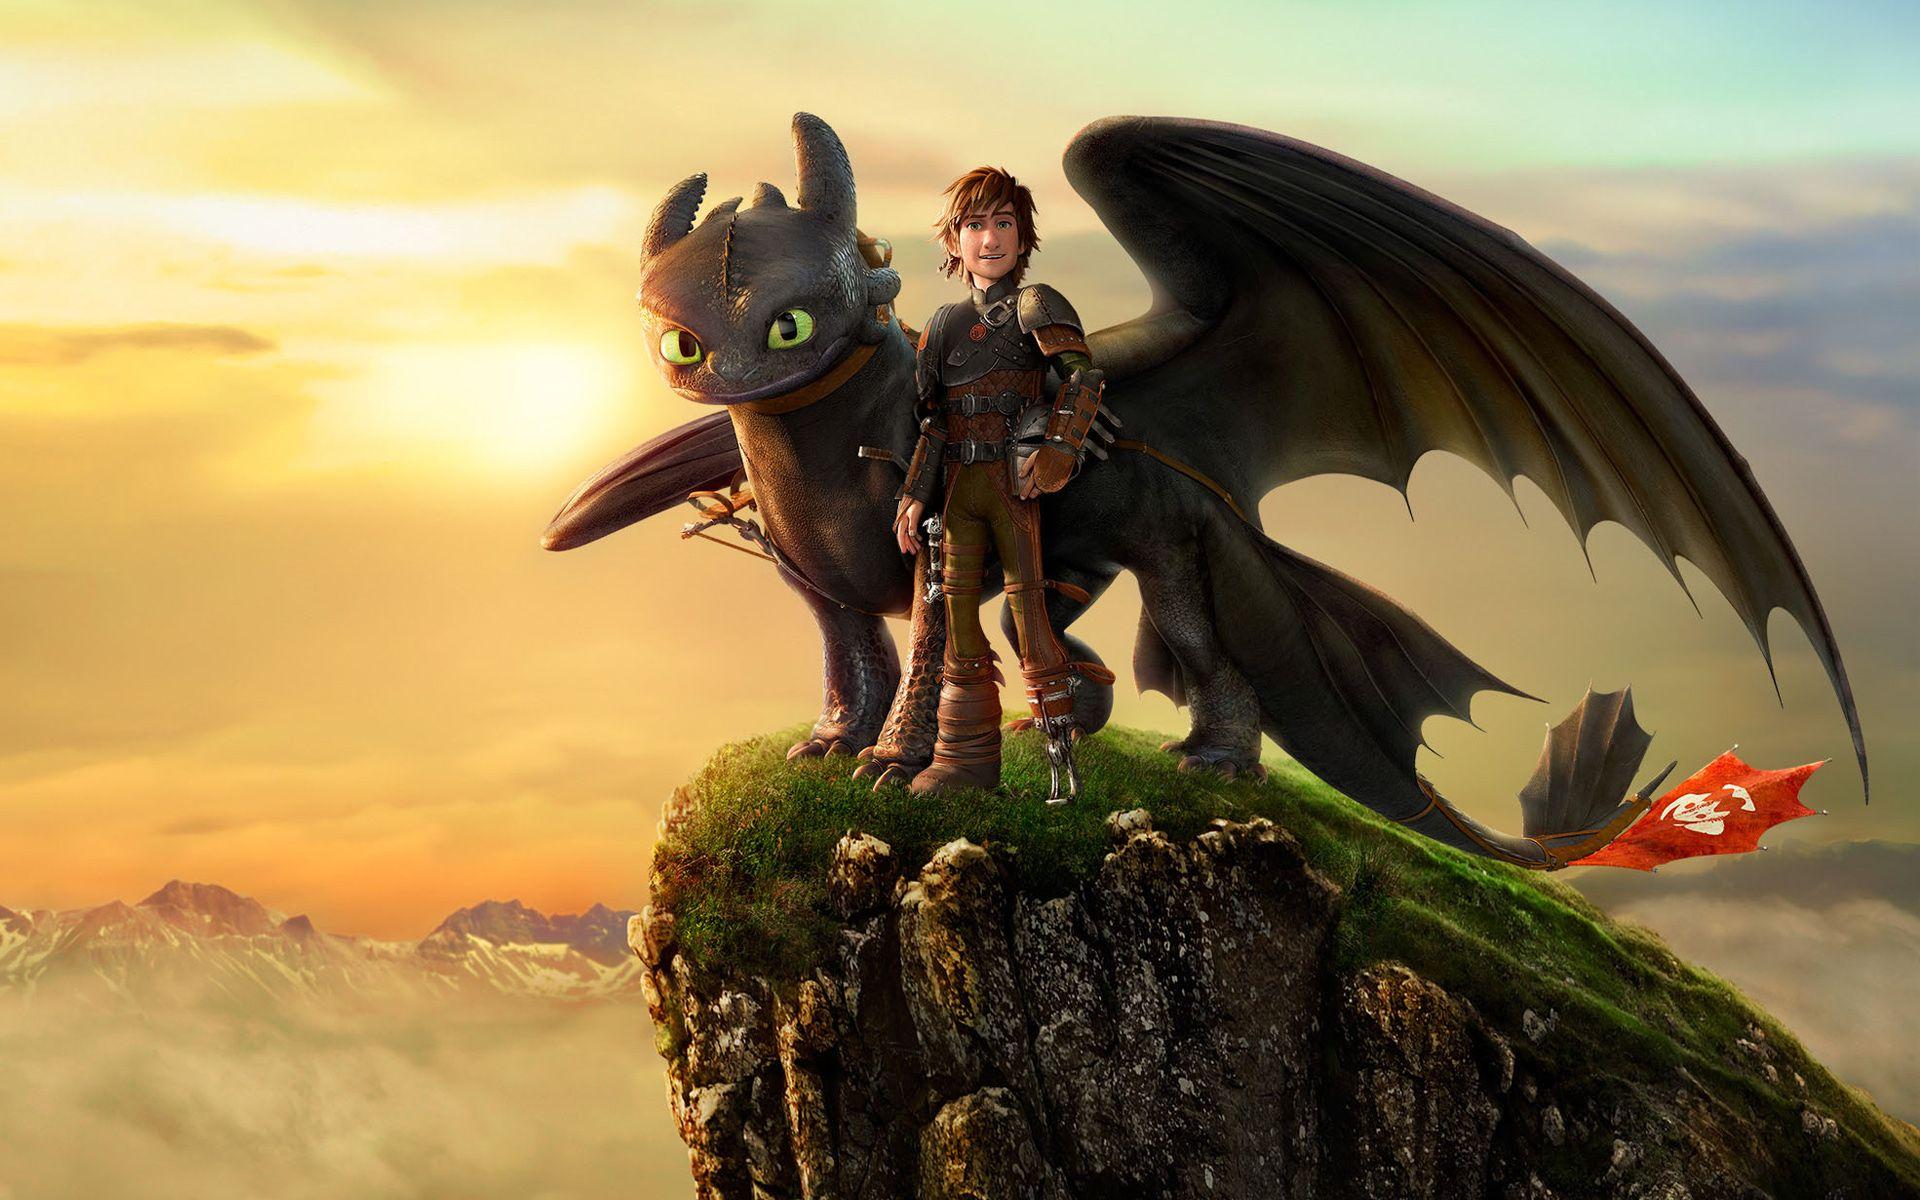 How To Train Your Dragon 2 Toothless Toy HD Wallpaper, Background Image